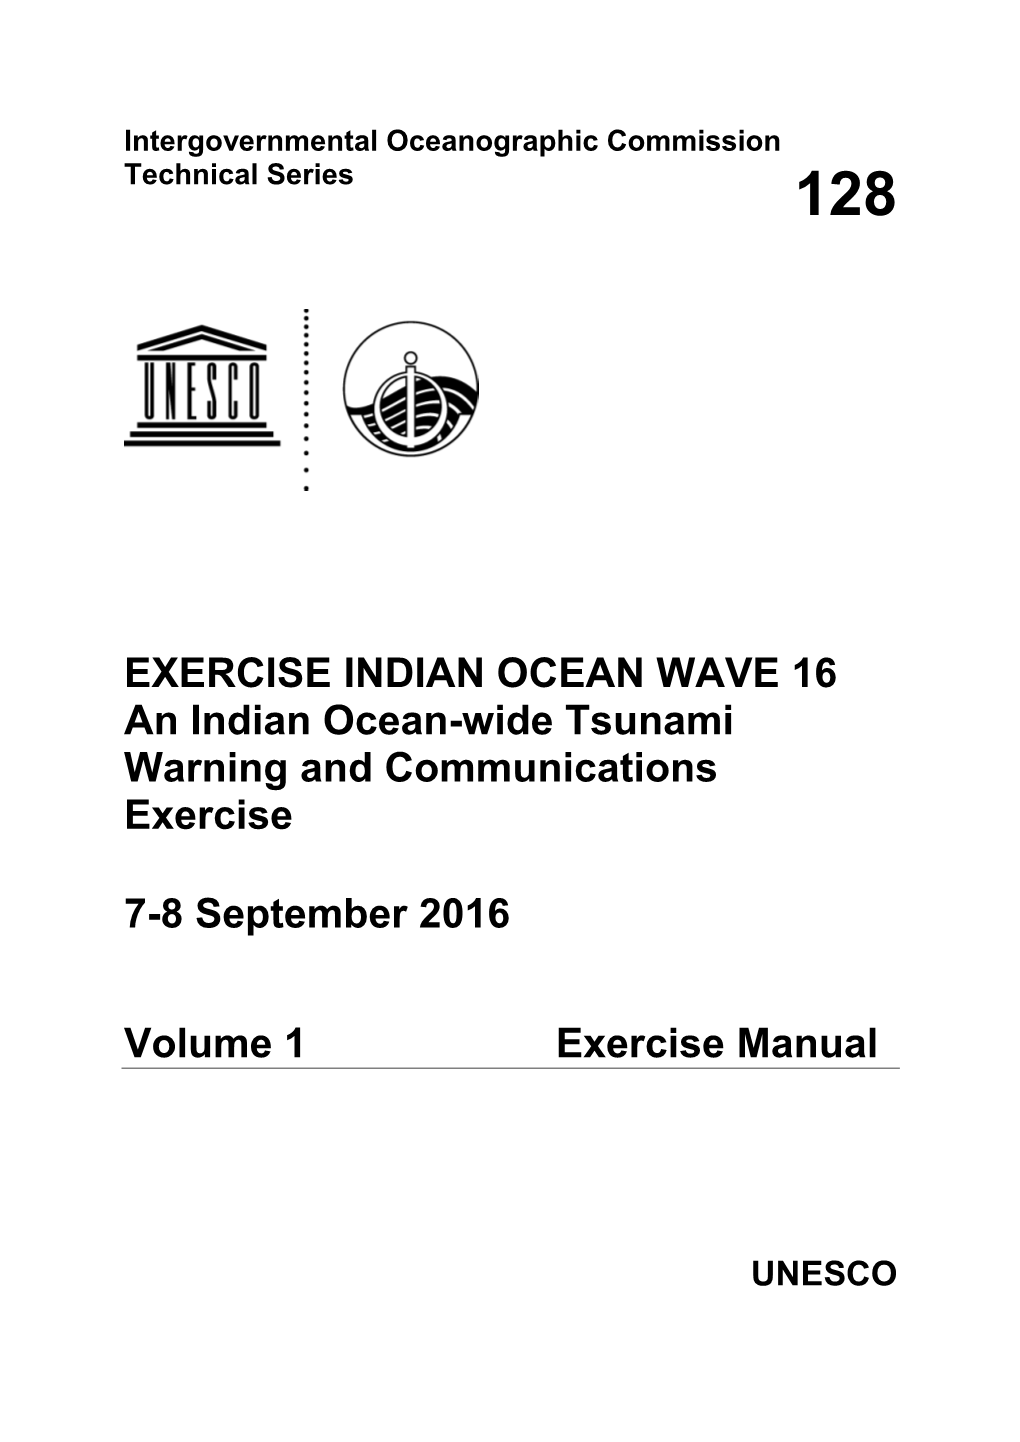 Exercise Indian Ocean Wave 2016: an Indian Ocean-Wide Tsunami Warning and Communication Exercise, 7-8 September 2016